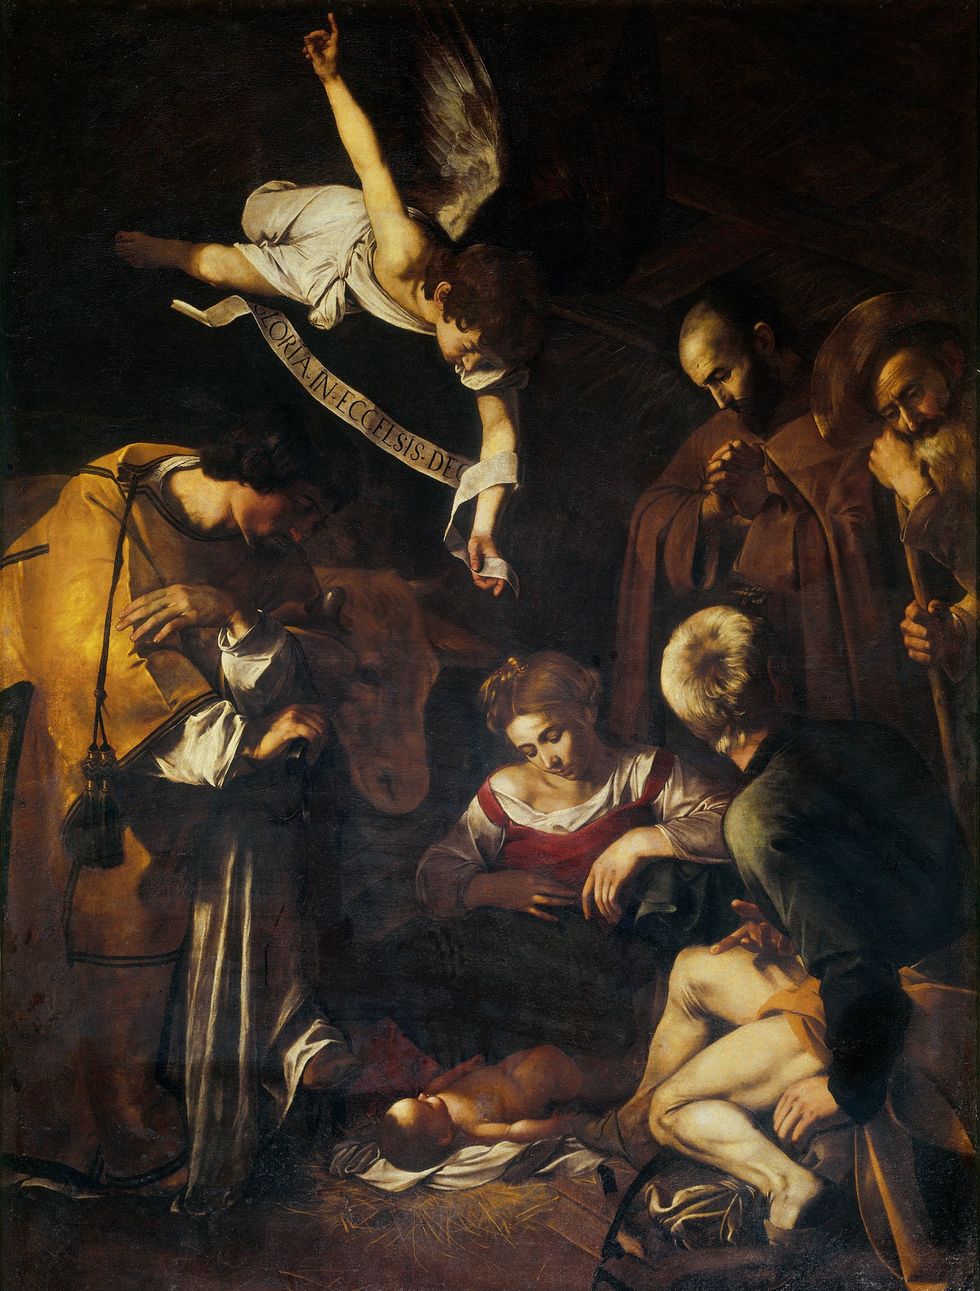  \u200b"Nativity with St. Francis and St. Lawrence" by Caravaggio